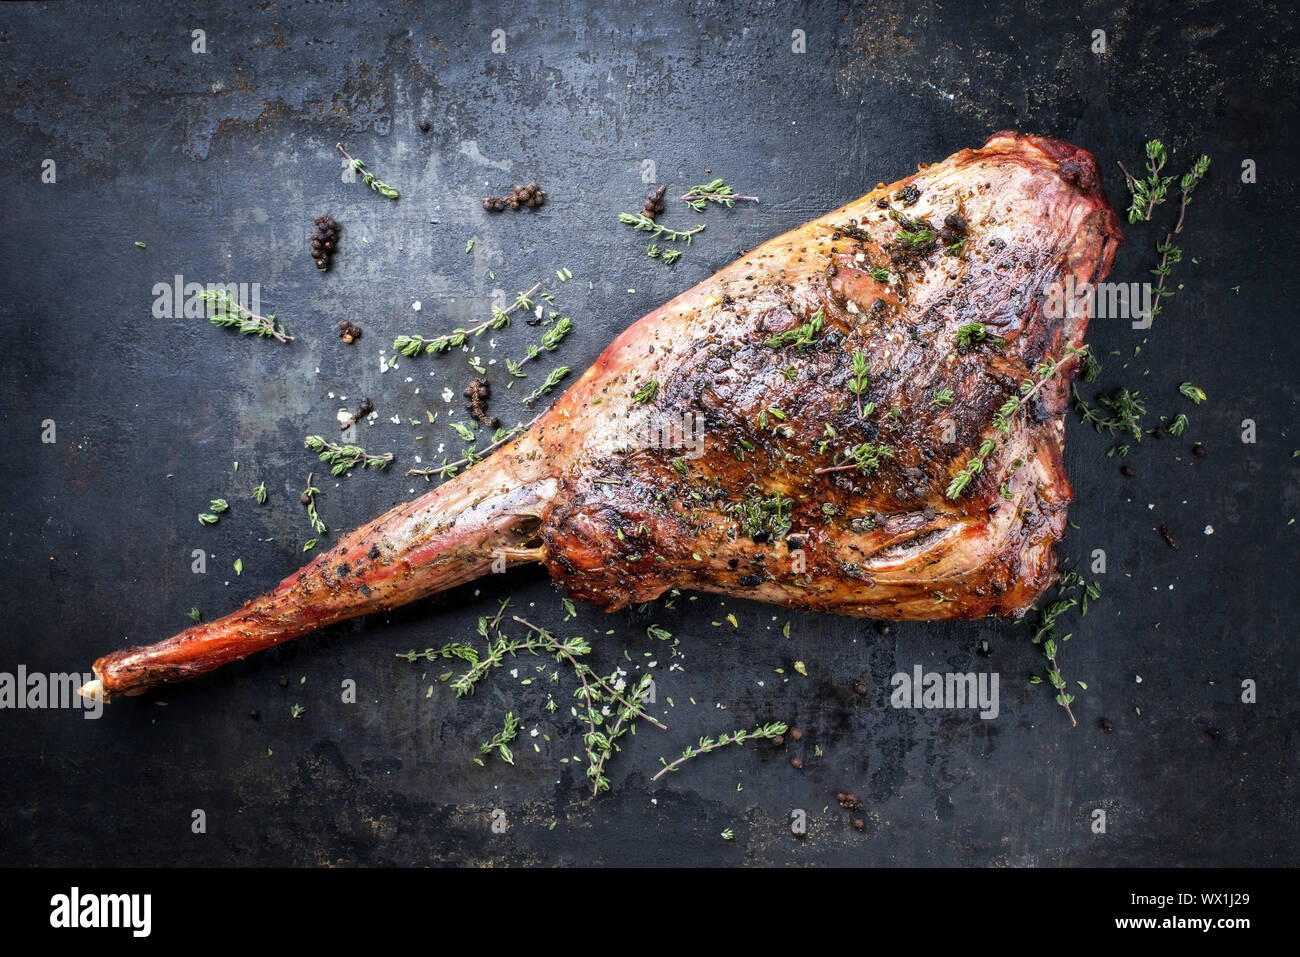 Marinated barbecue aged leg of venison with herbs as top view on a rustic board Stock Photo